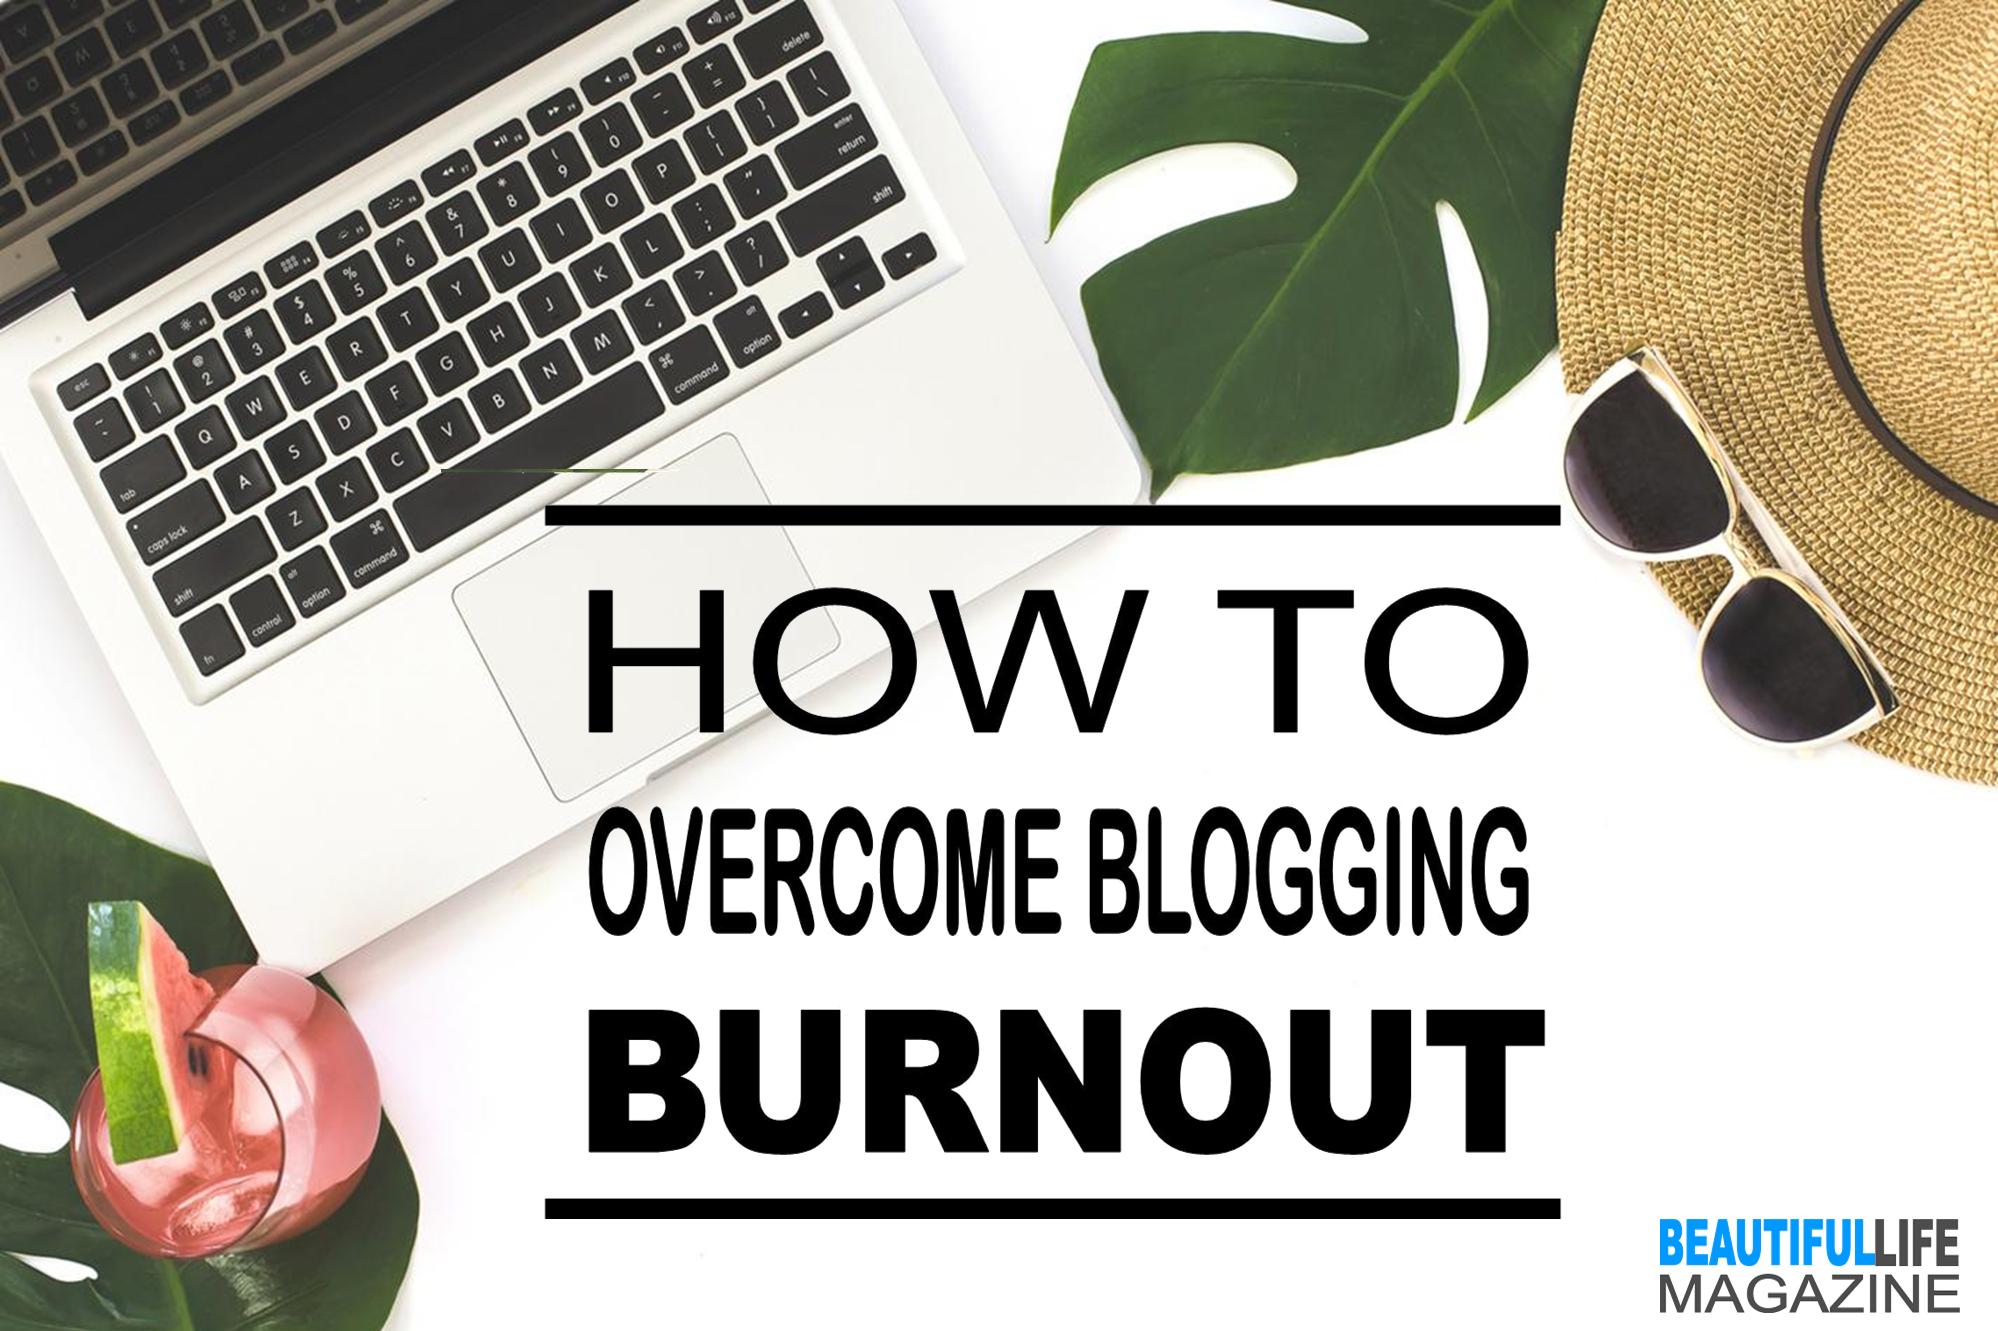 Coming up with new content ideas for your blog can be exhausting. One minute you are on a role and the next one you're facing blogging burnout.